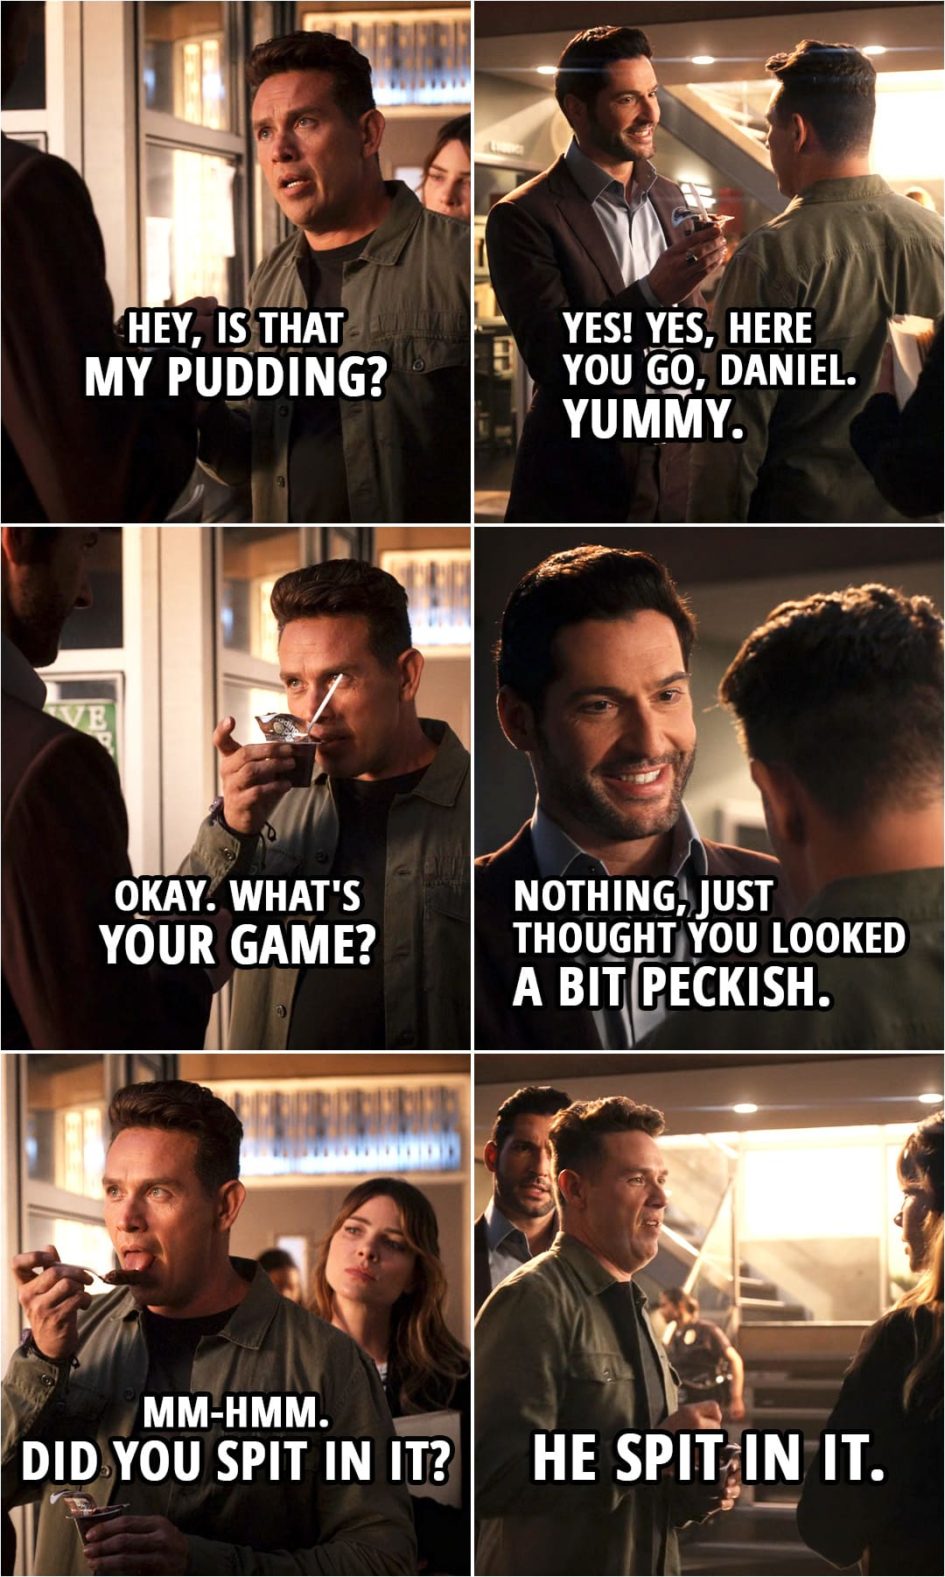 Quote from Lucifer 5x02 | (Michael is pretending to be Lucifer...) Dan Espinoza: Hey, is that my pudding? Michael: Yes! Yes, here you go, Daniel. Yummy. Dan Espinoza: Okay. What's your game? Michael: Nothing, just thought you looked a bit peckish. Dan Espinoza: Uh-huh. Mm-hmm. Did you spit in it? (to Chloe): He spit in it.